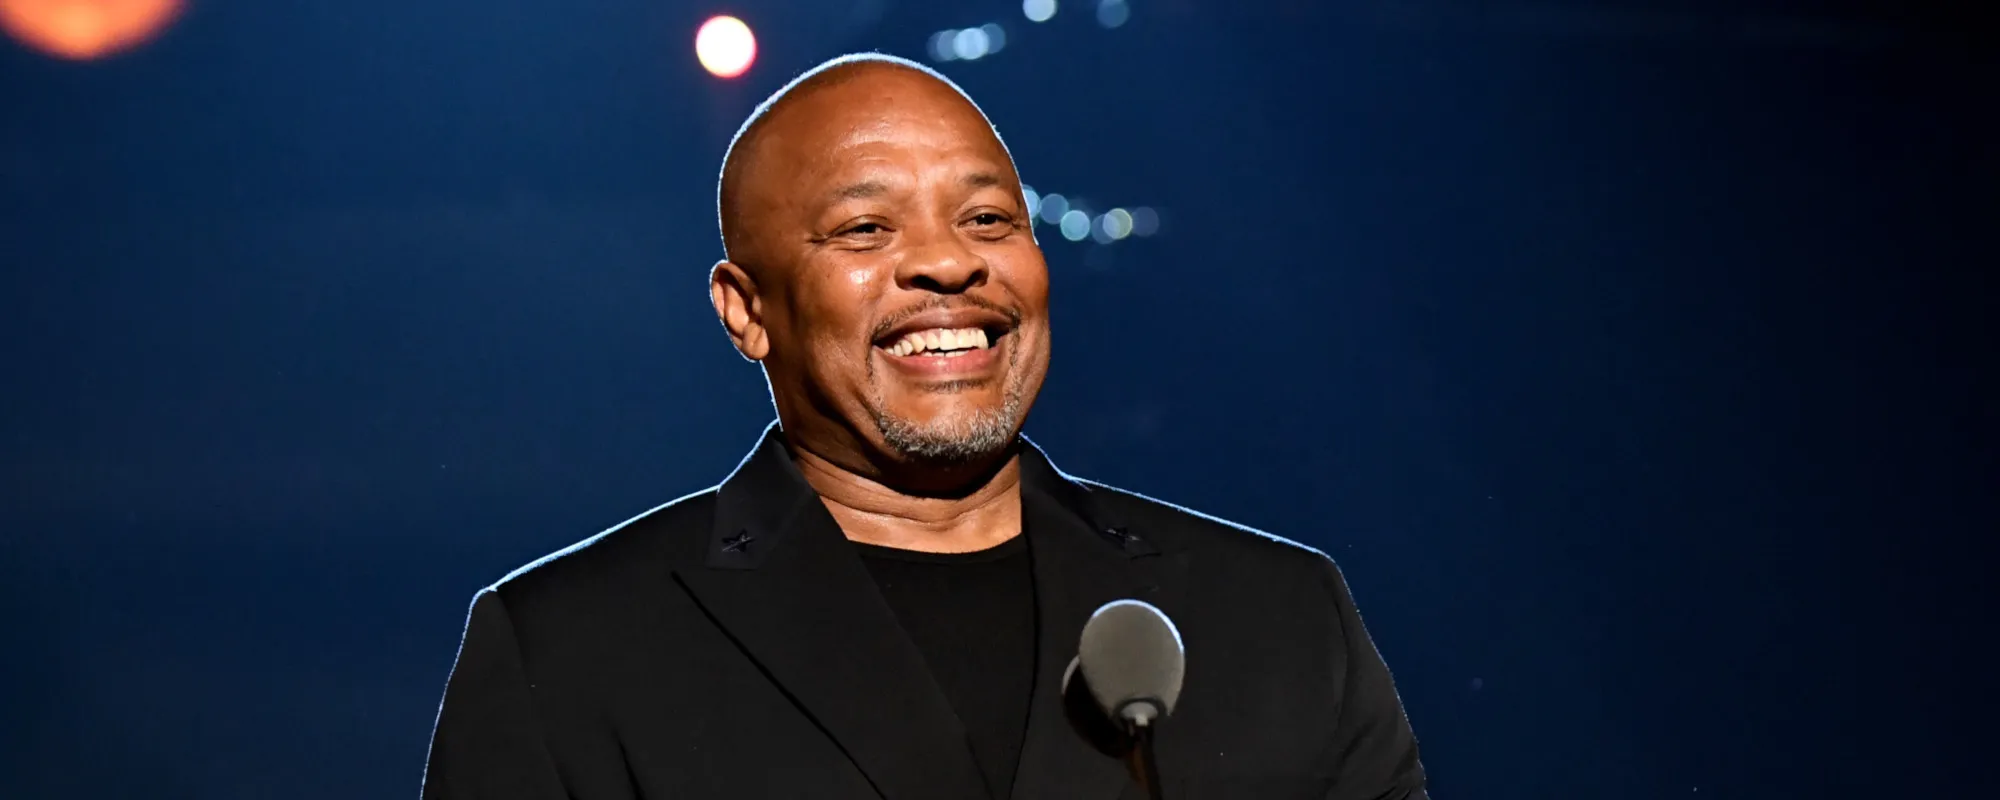 Dr. Dre to Sell Music Assets to Universal and Shamrock Capital for $200-Plus Million